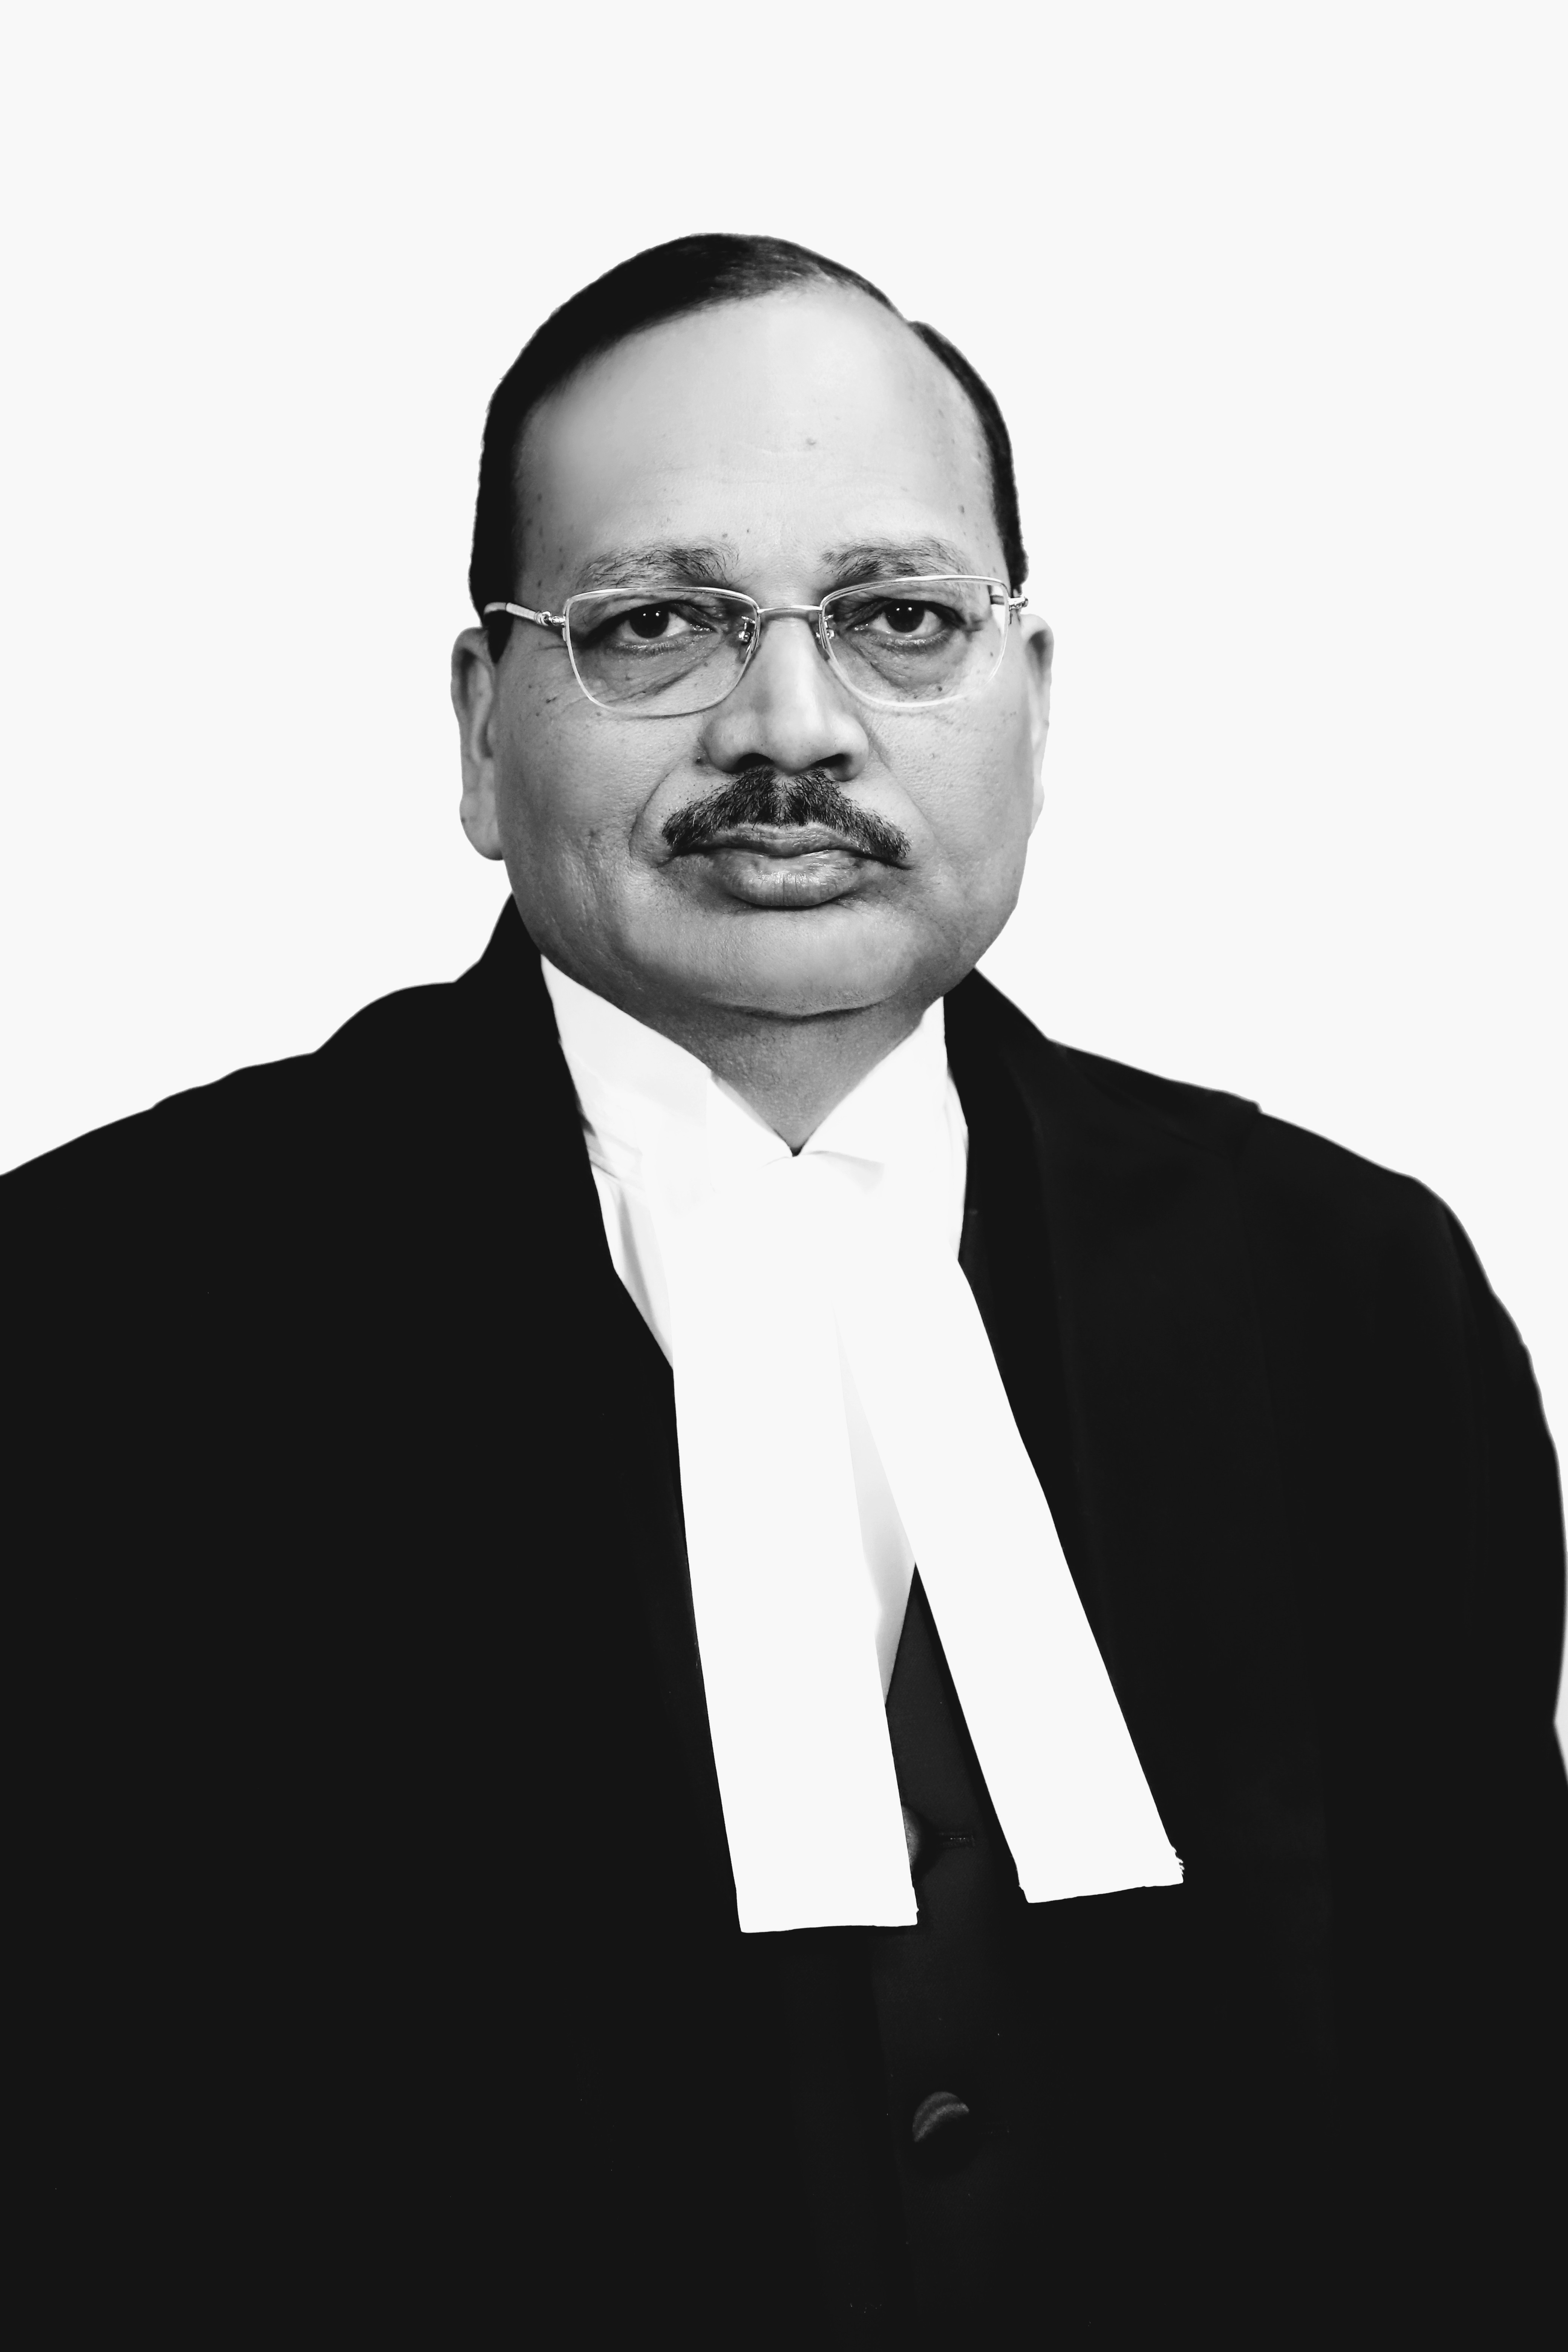 Hon’ble Mr. Justice Surya Kant